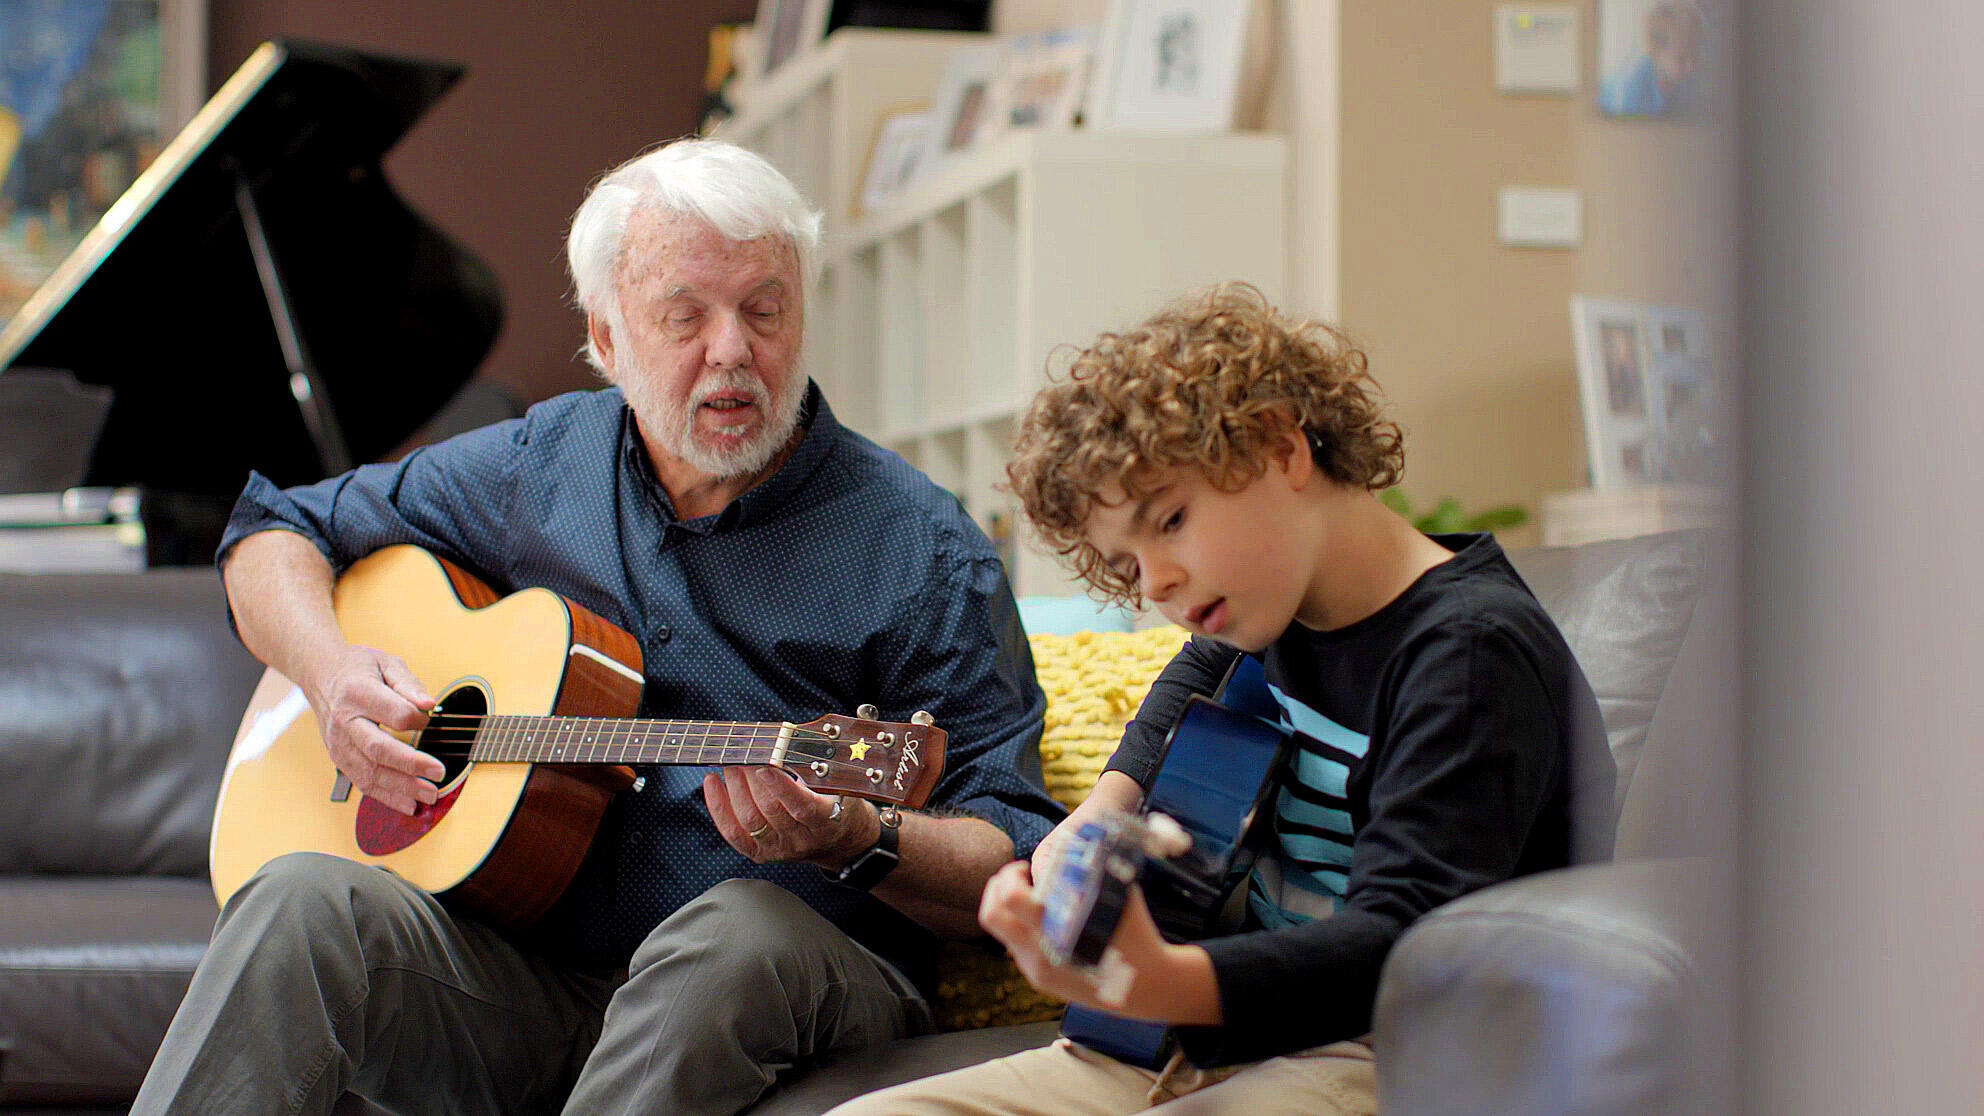 A man and a child wearing a Cochlear implant play acoustic guitars